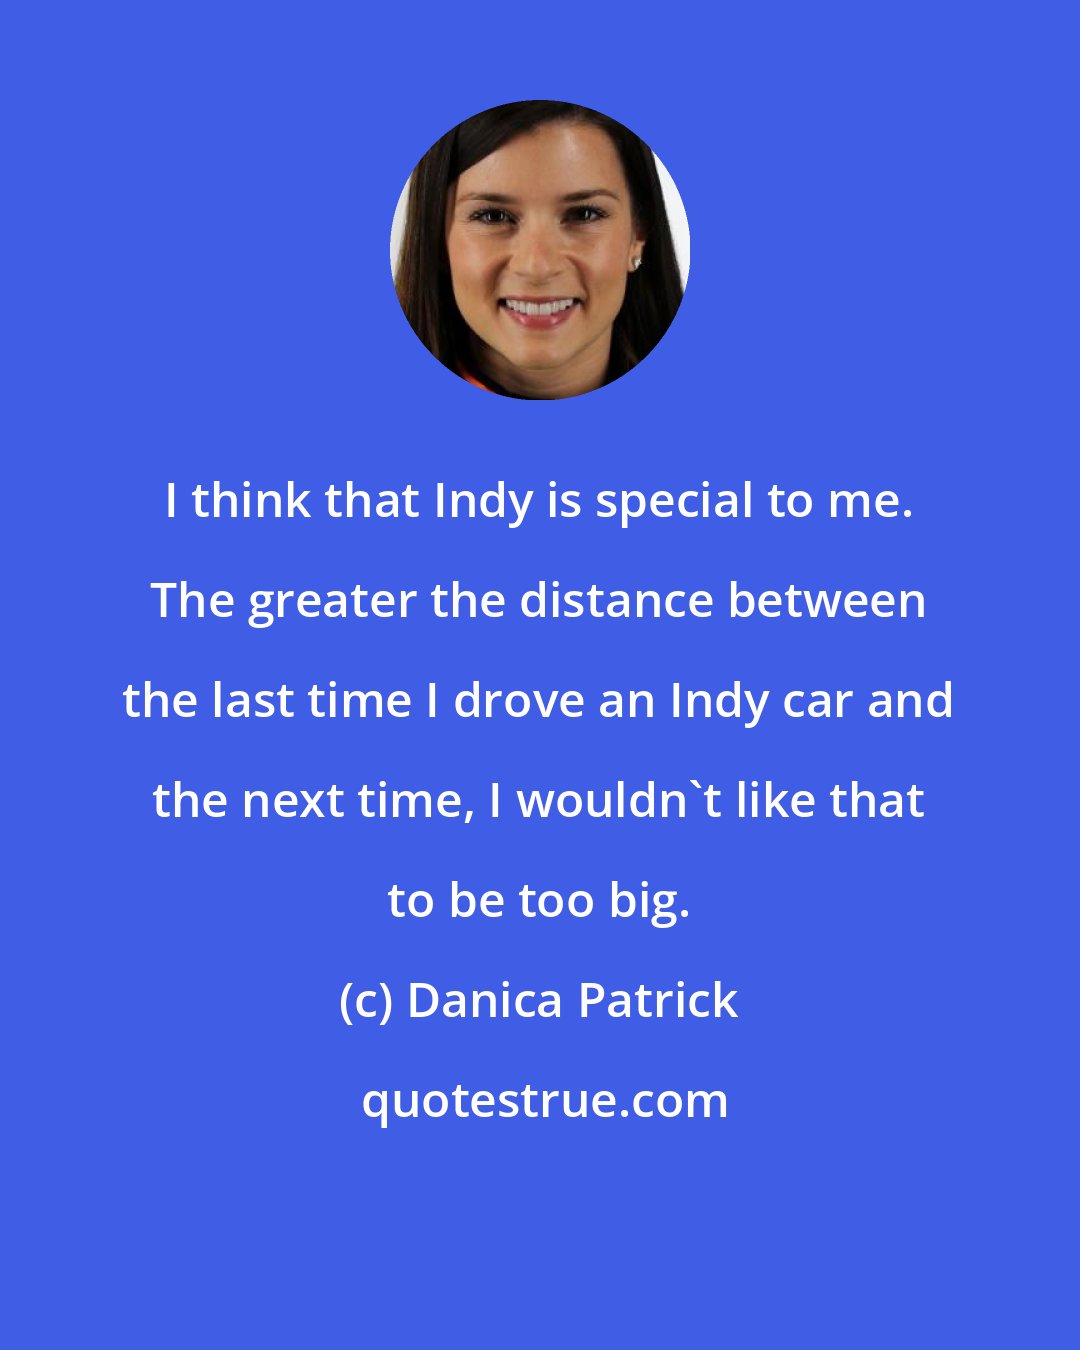 Danica Patrick: I think that Indy is special to me. The greater the distance between the last time I drove an Indy car and the next time, I wouldn't like that to be too big.